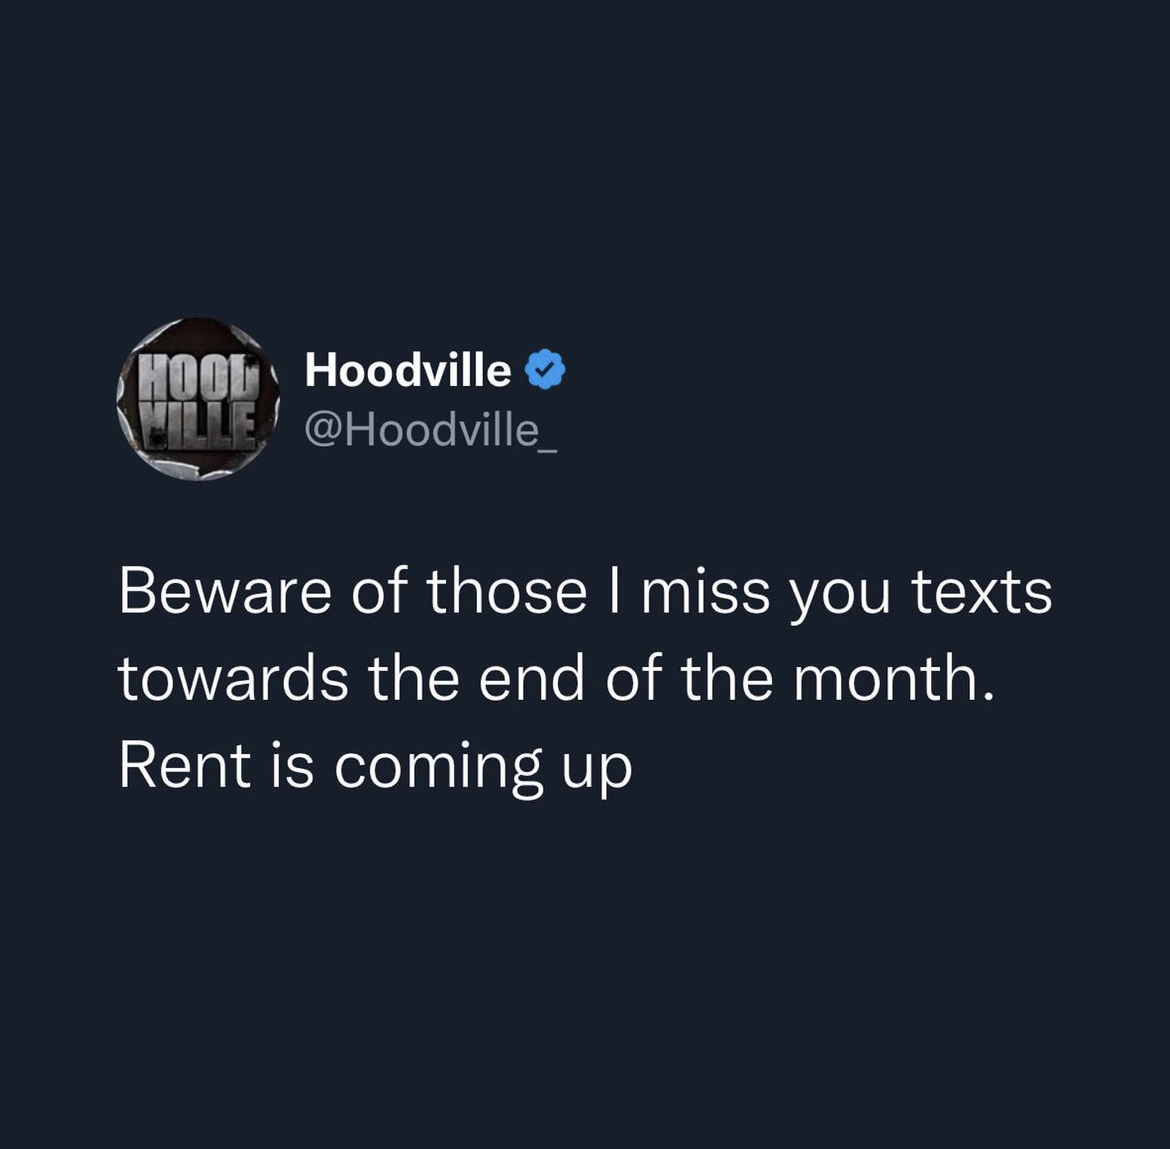 Hoodville memes and captions - hoodville fell asleep at 7 meme - Hool Hoodville Ville Beware of those I miss you texts towards the end of the month. Rent is coming up